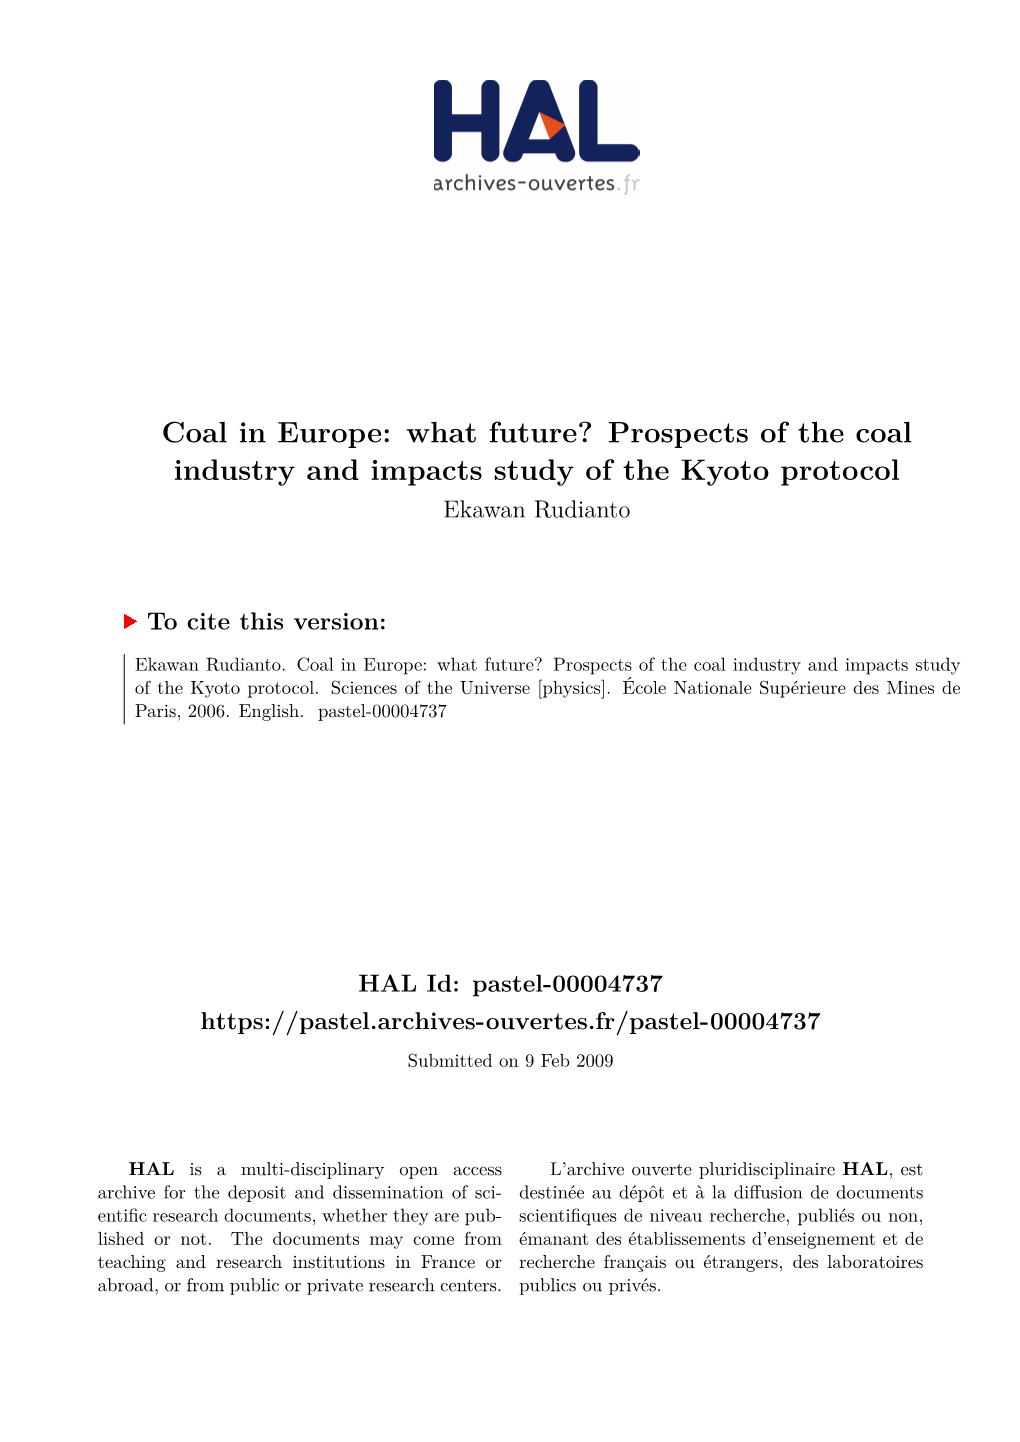 Coal in Europe: What Future? Prospects of the Coal Industry and Impacts Study of the Kyoto Protocol Ekawan Rudianto